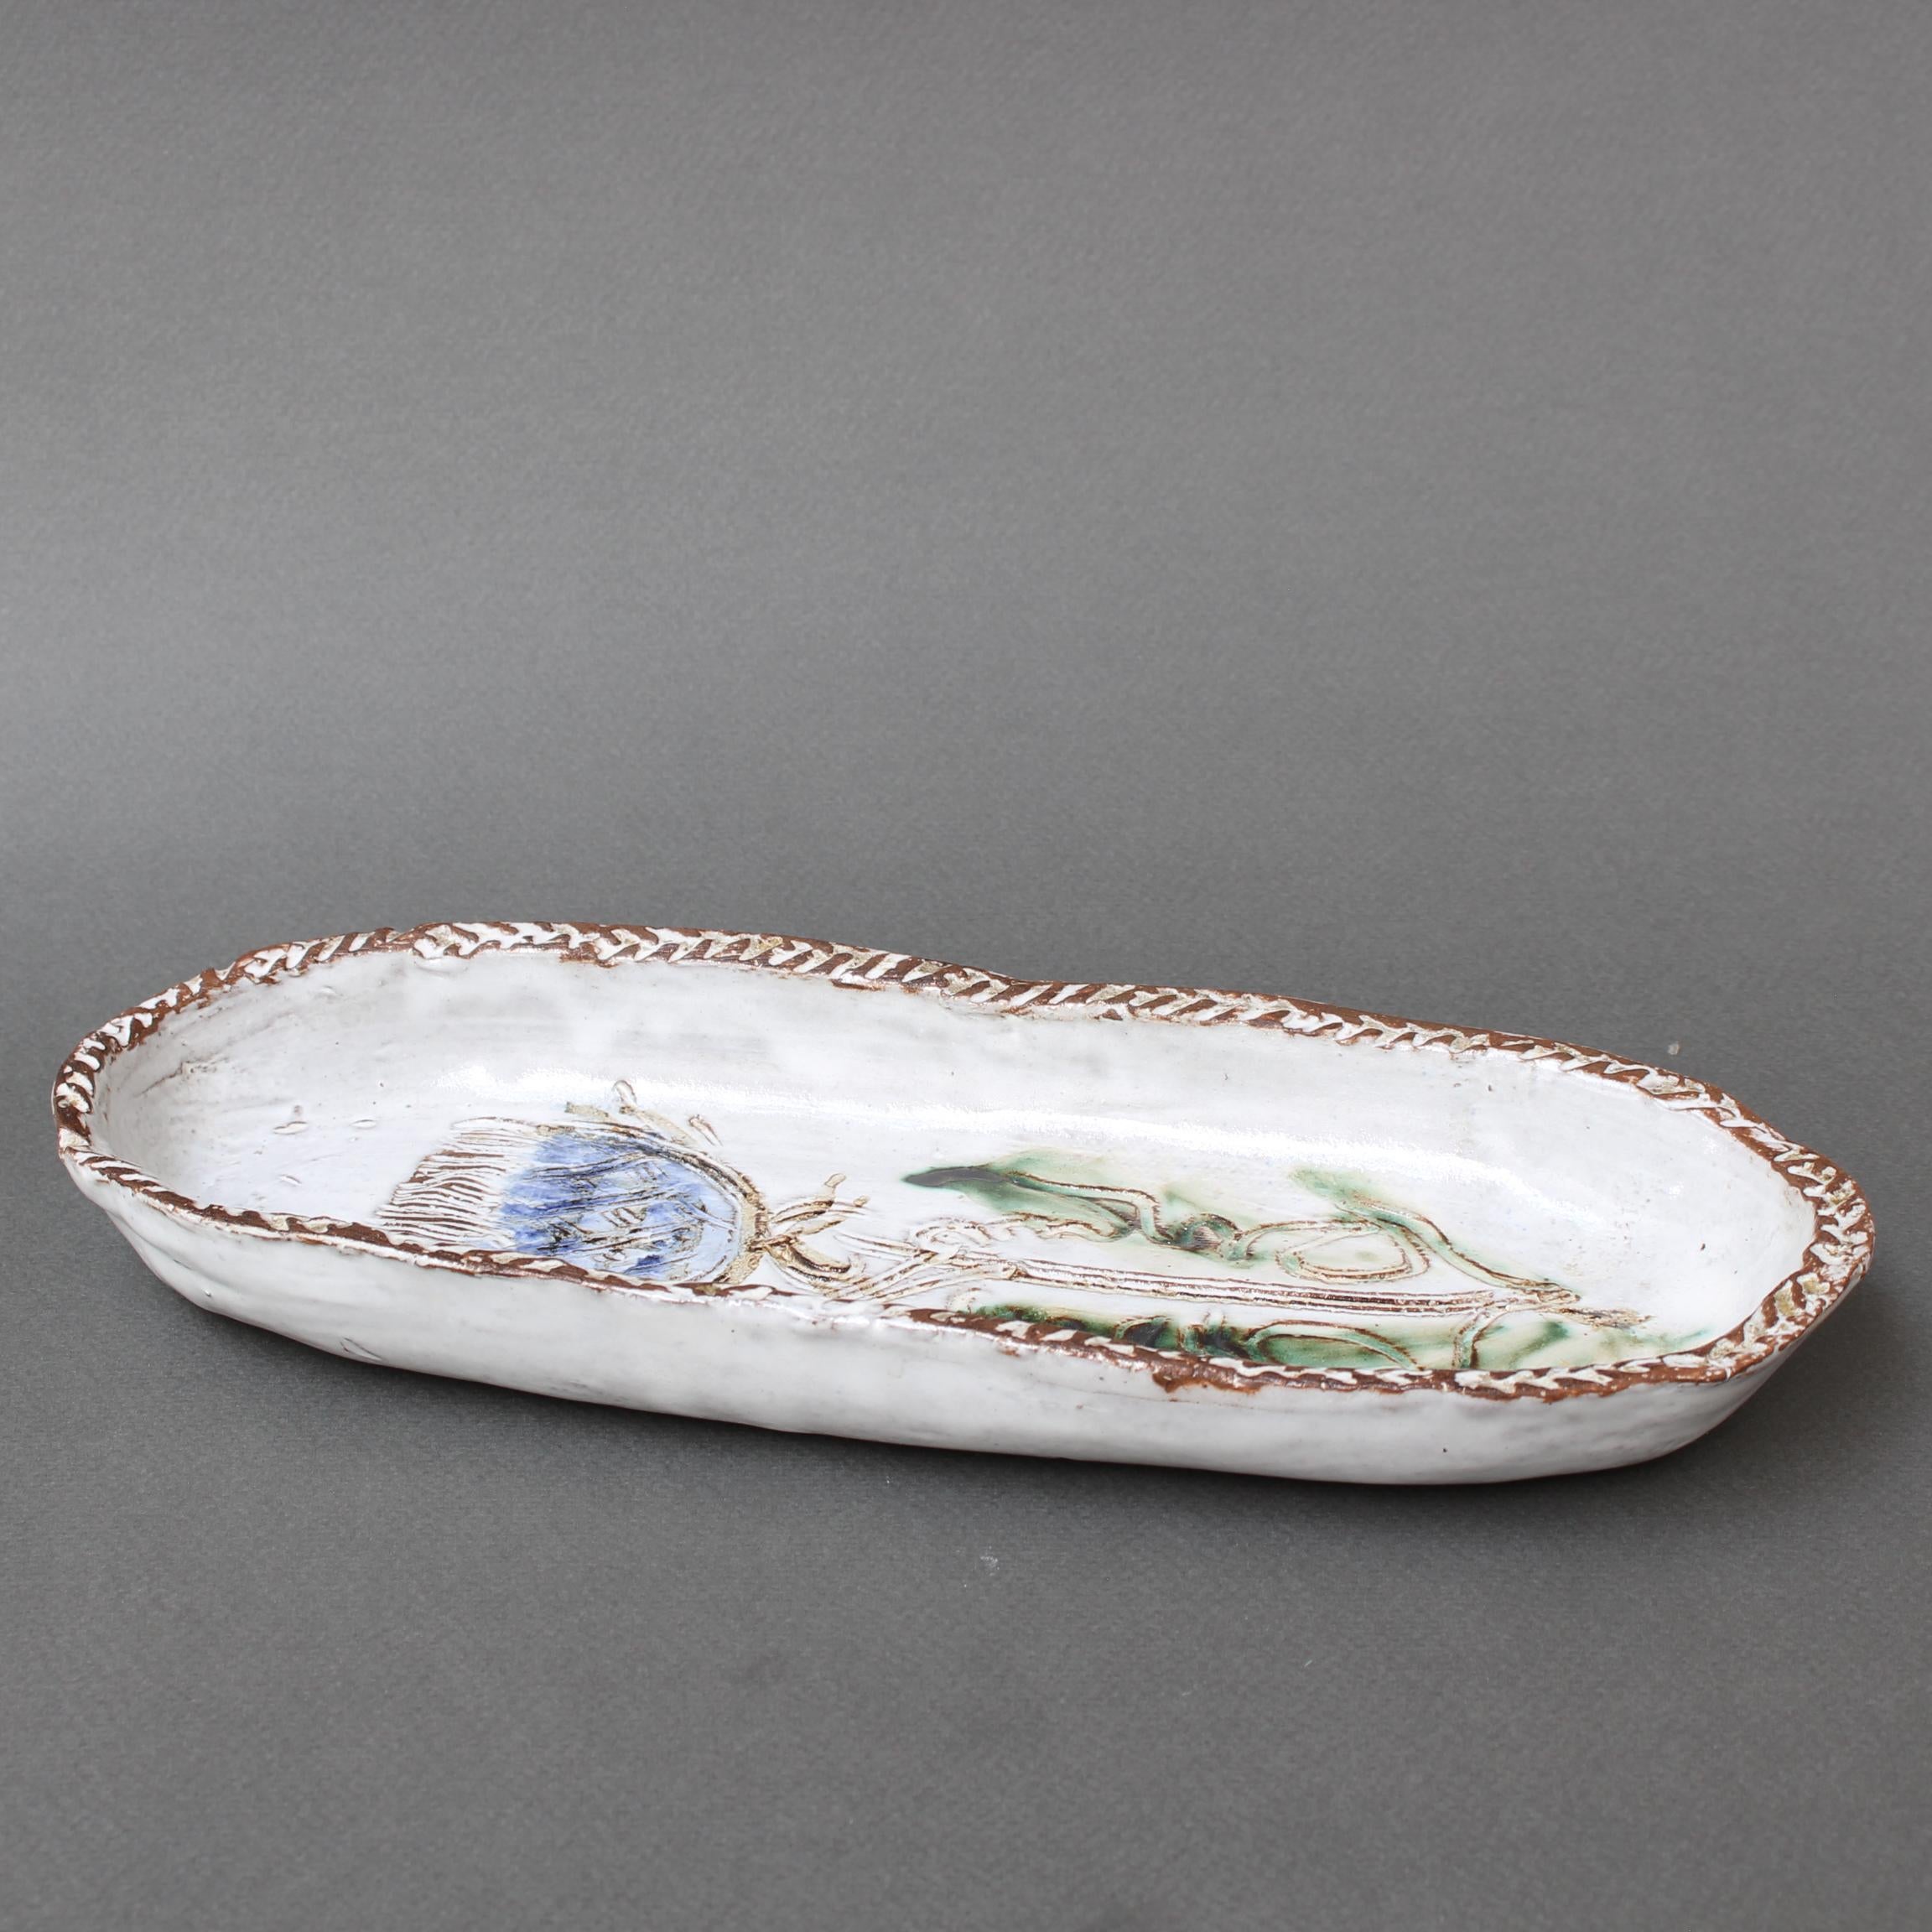 French Ceramic Decorative Dish with Flower Motif by Albert Thiry (circa 1970s) For Sale 5